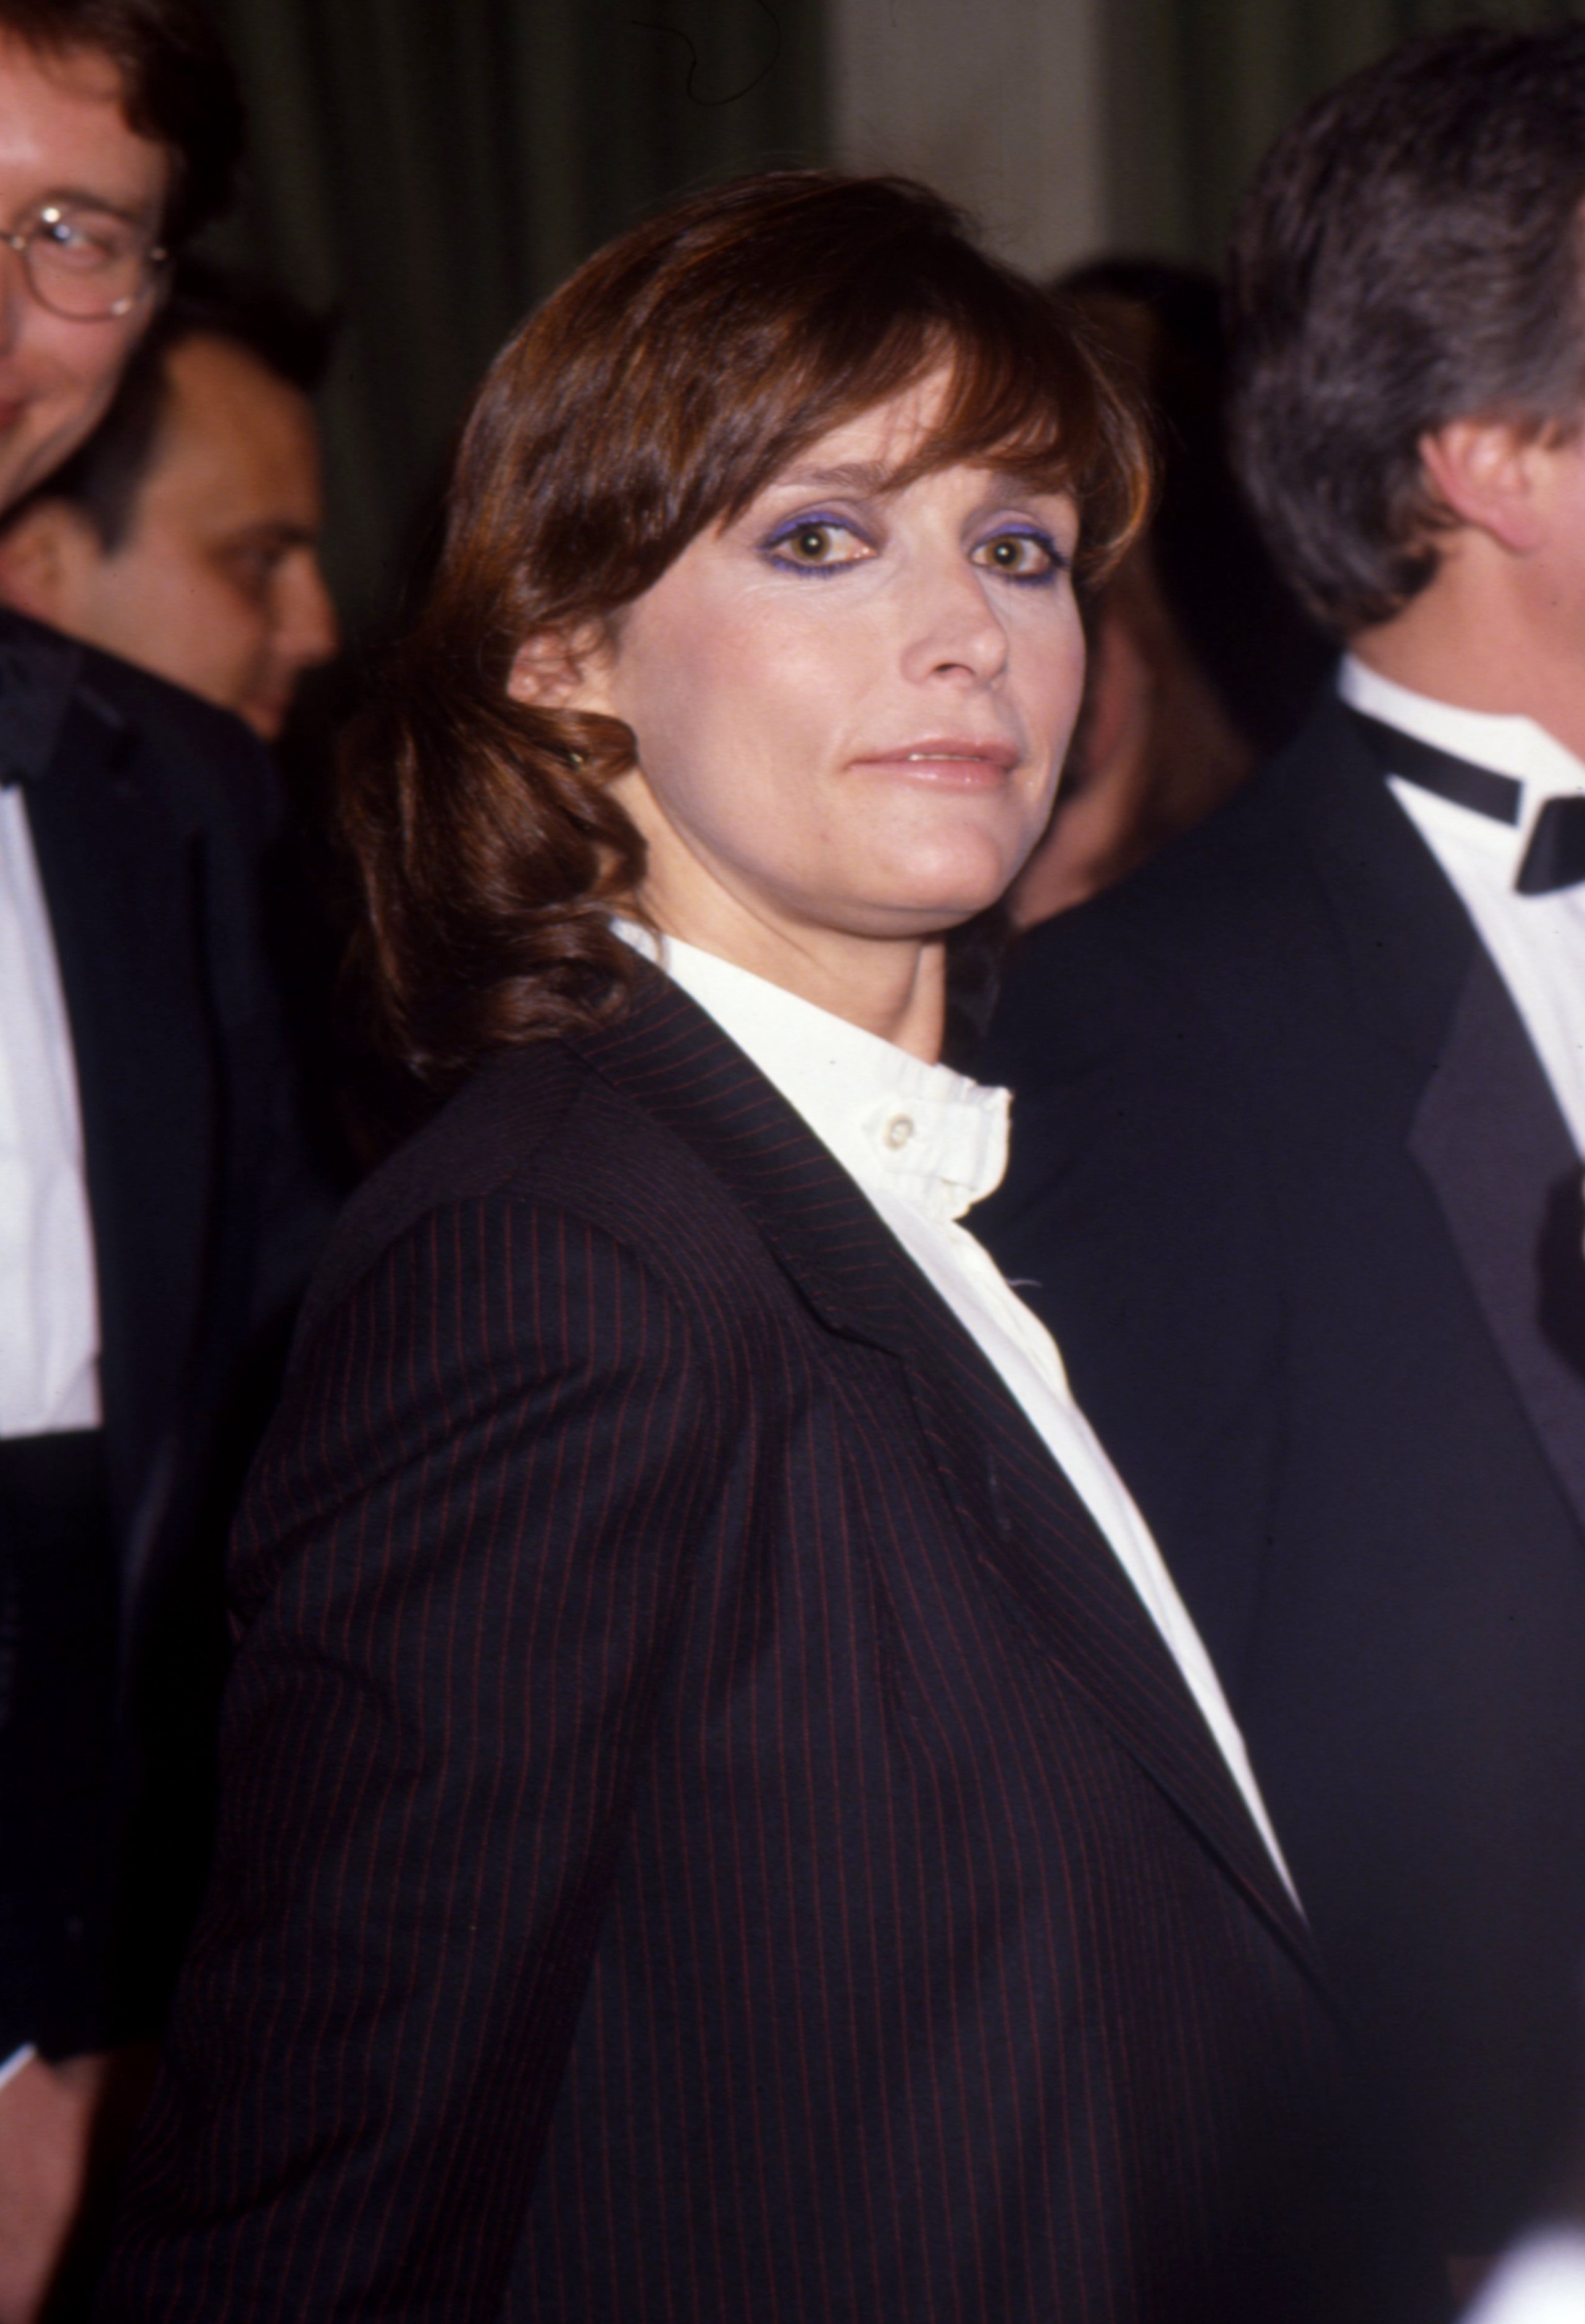 Actress Margot Kidder attends an event in circa 1991 circa 1991 in Los Angeles, California. | Source: Getty Images